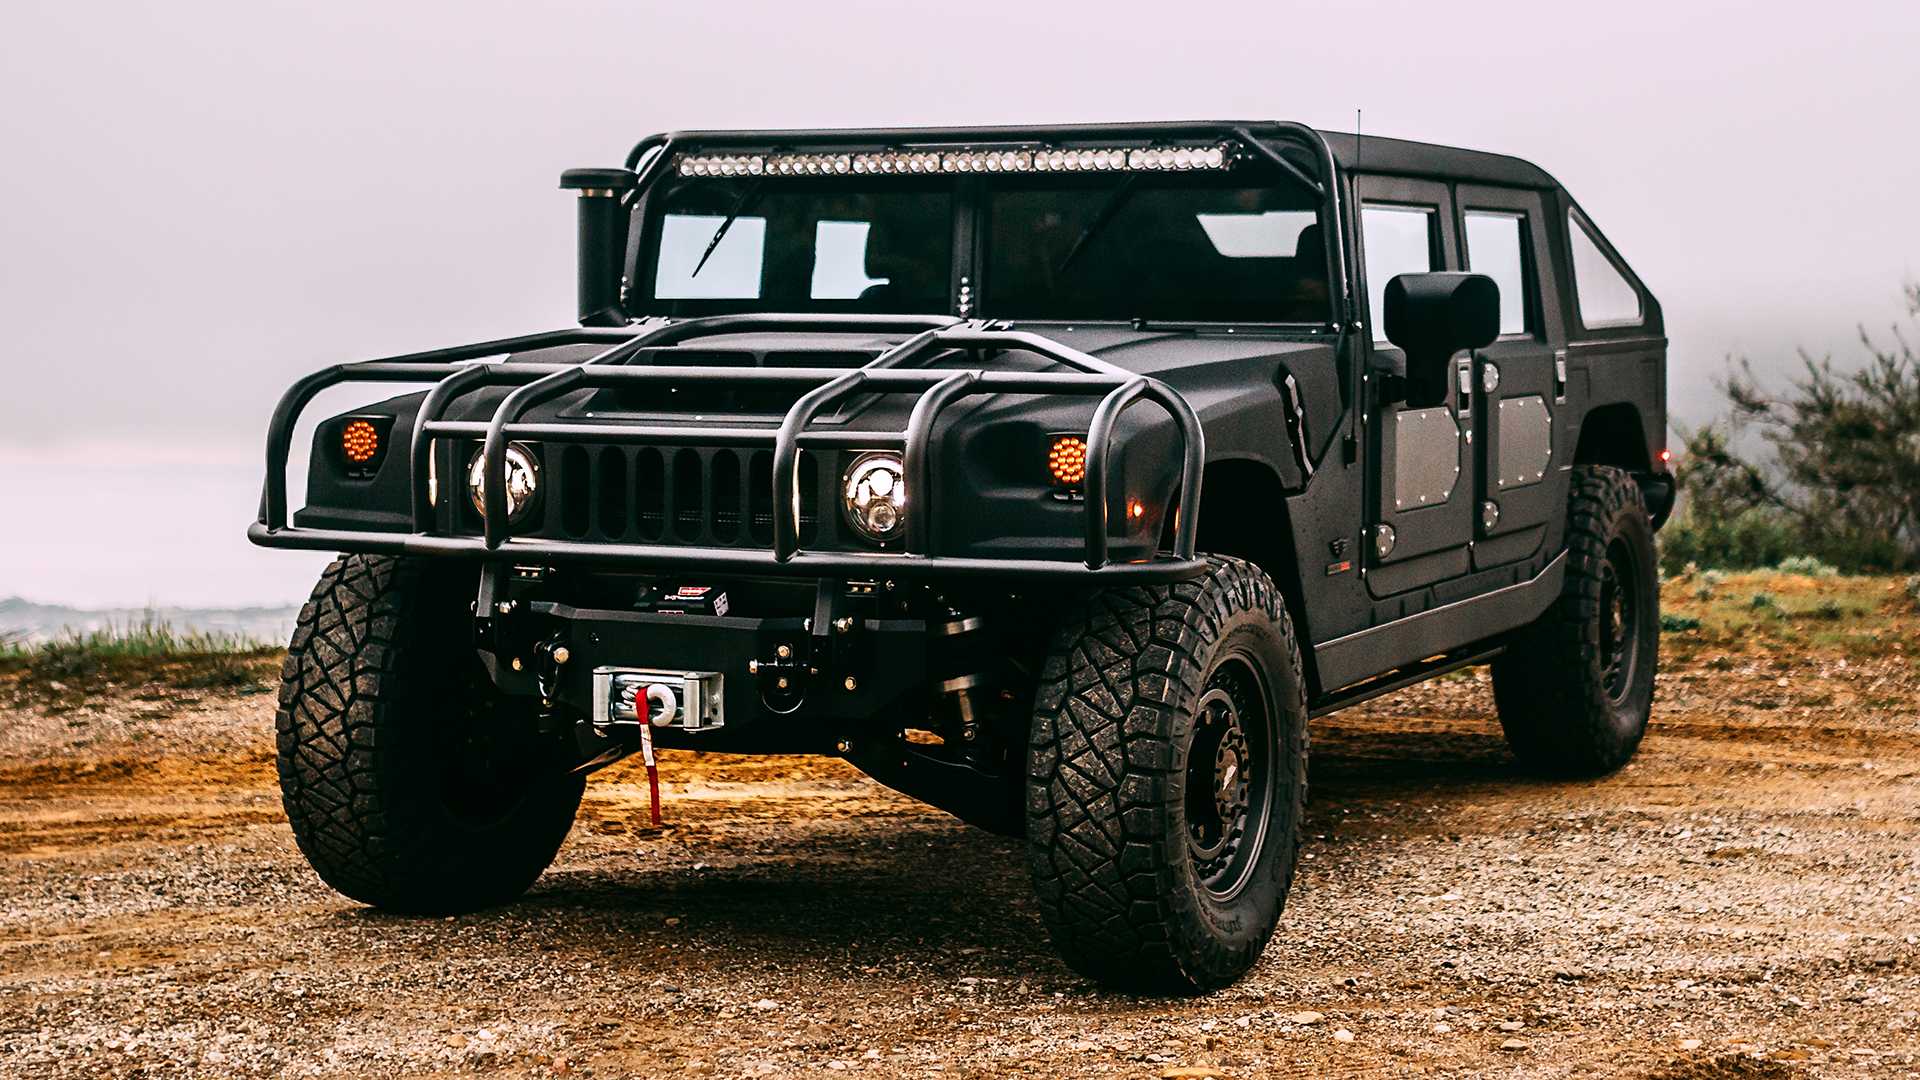 Mil Spec's New Custom Hummer Looks Ready To Embrace The Dark Side